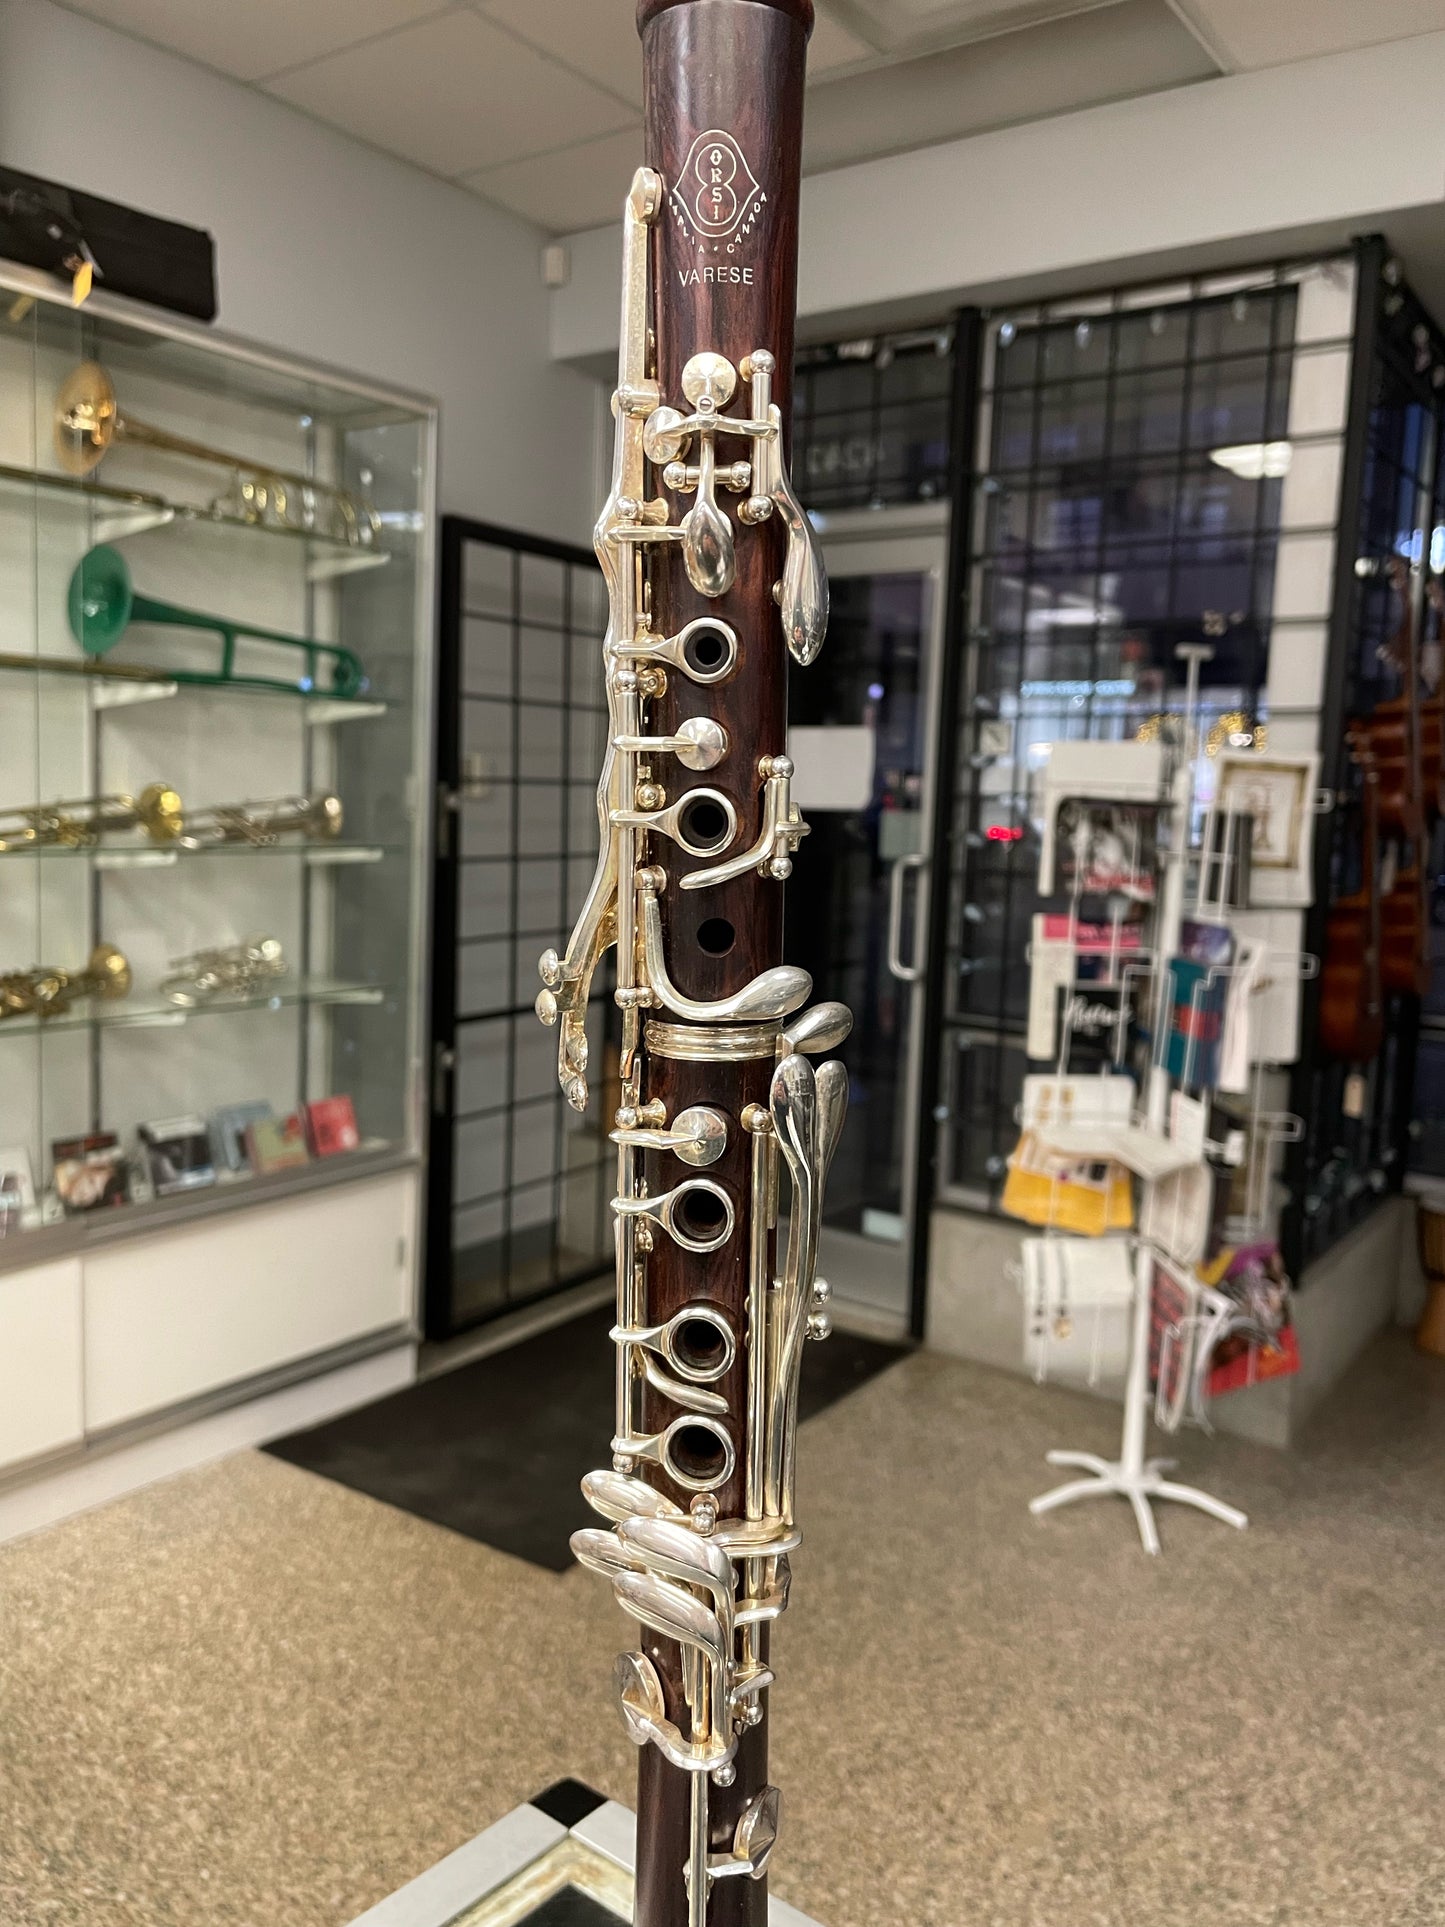 Pre-Owned Orsi & Weir Bb Clarinet